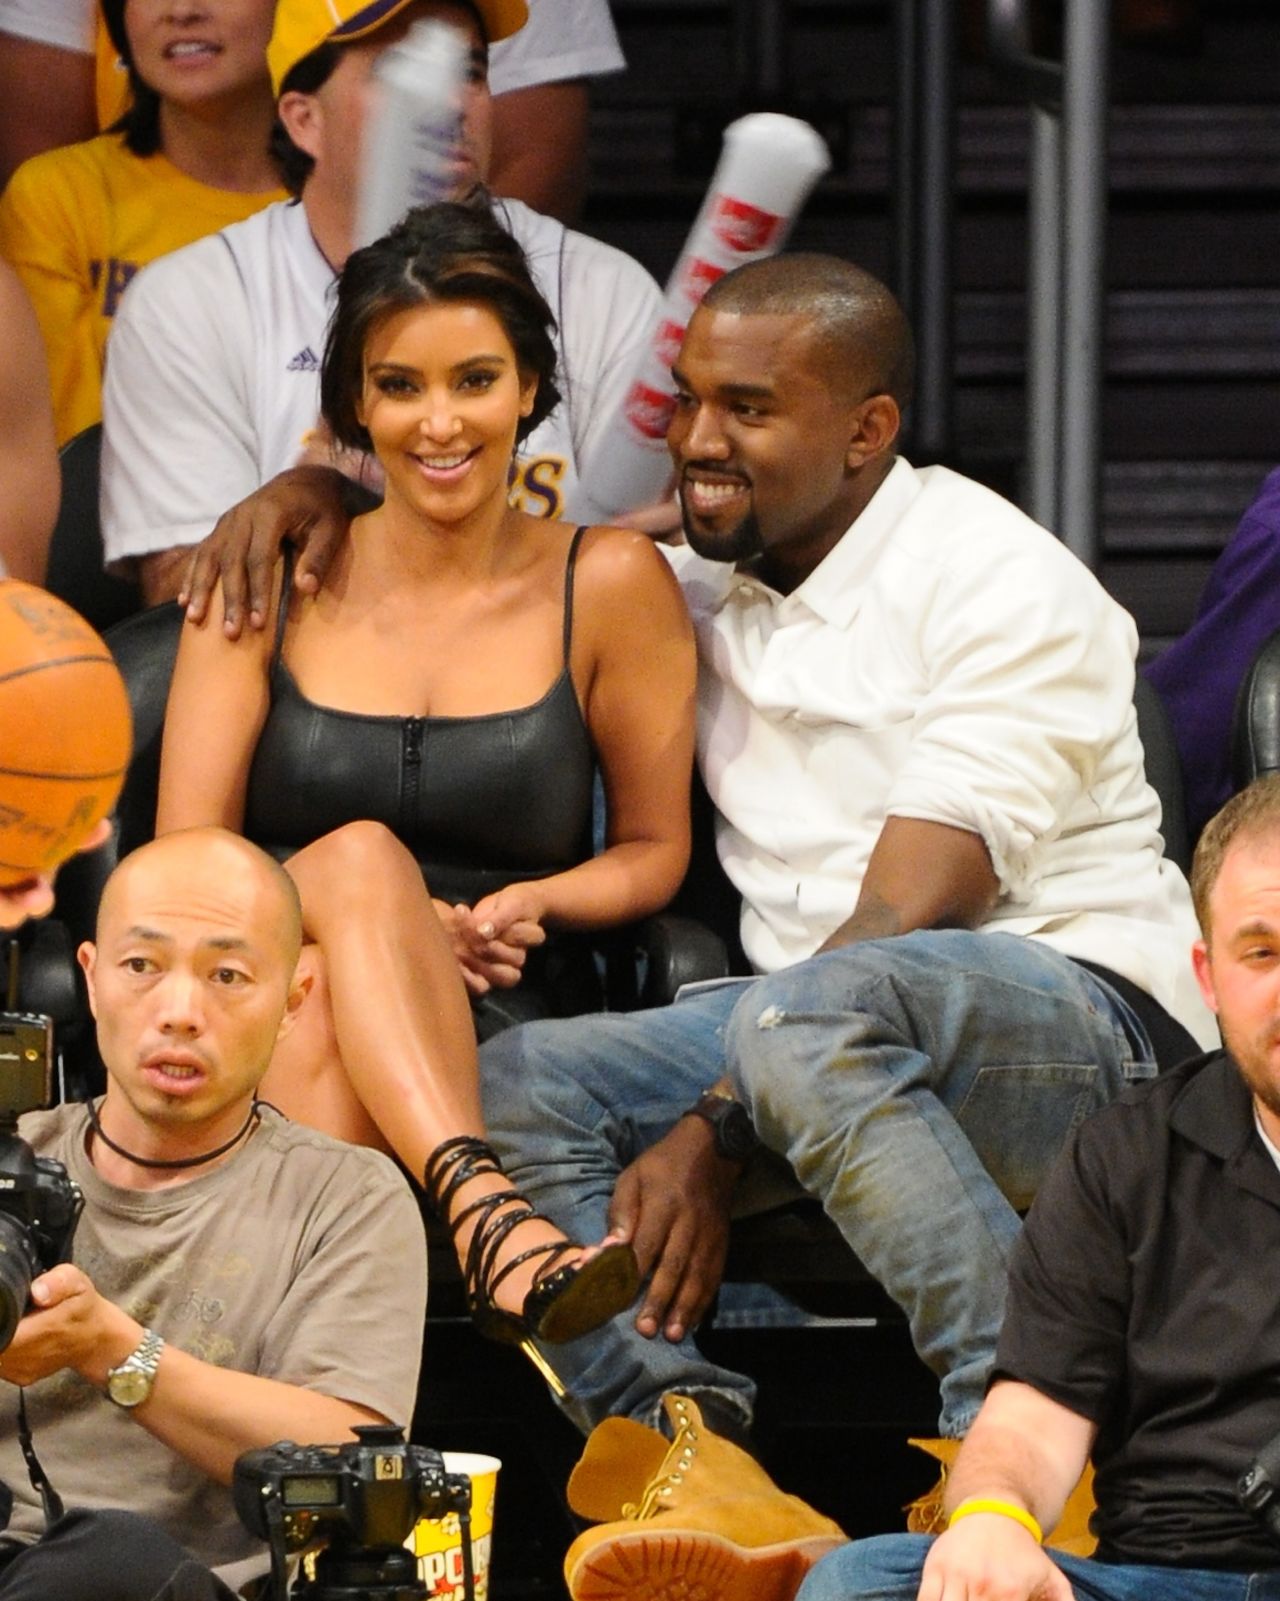 Suspicions that the two were an item were going strong in April 2012 after Kanye's profession of love went viral, and their snuggling at a Lakers game in May of that year bolstered the reports. 